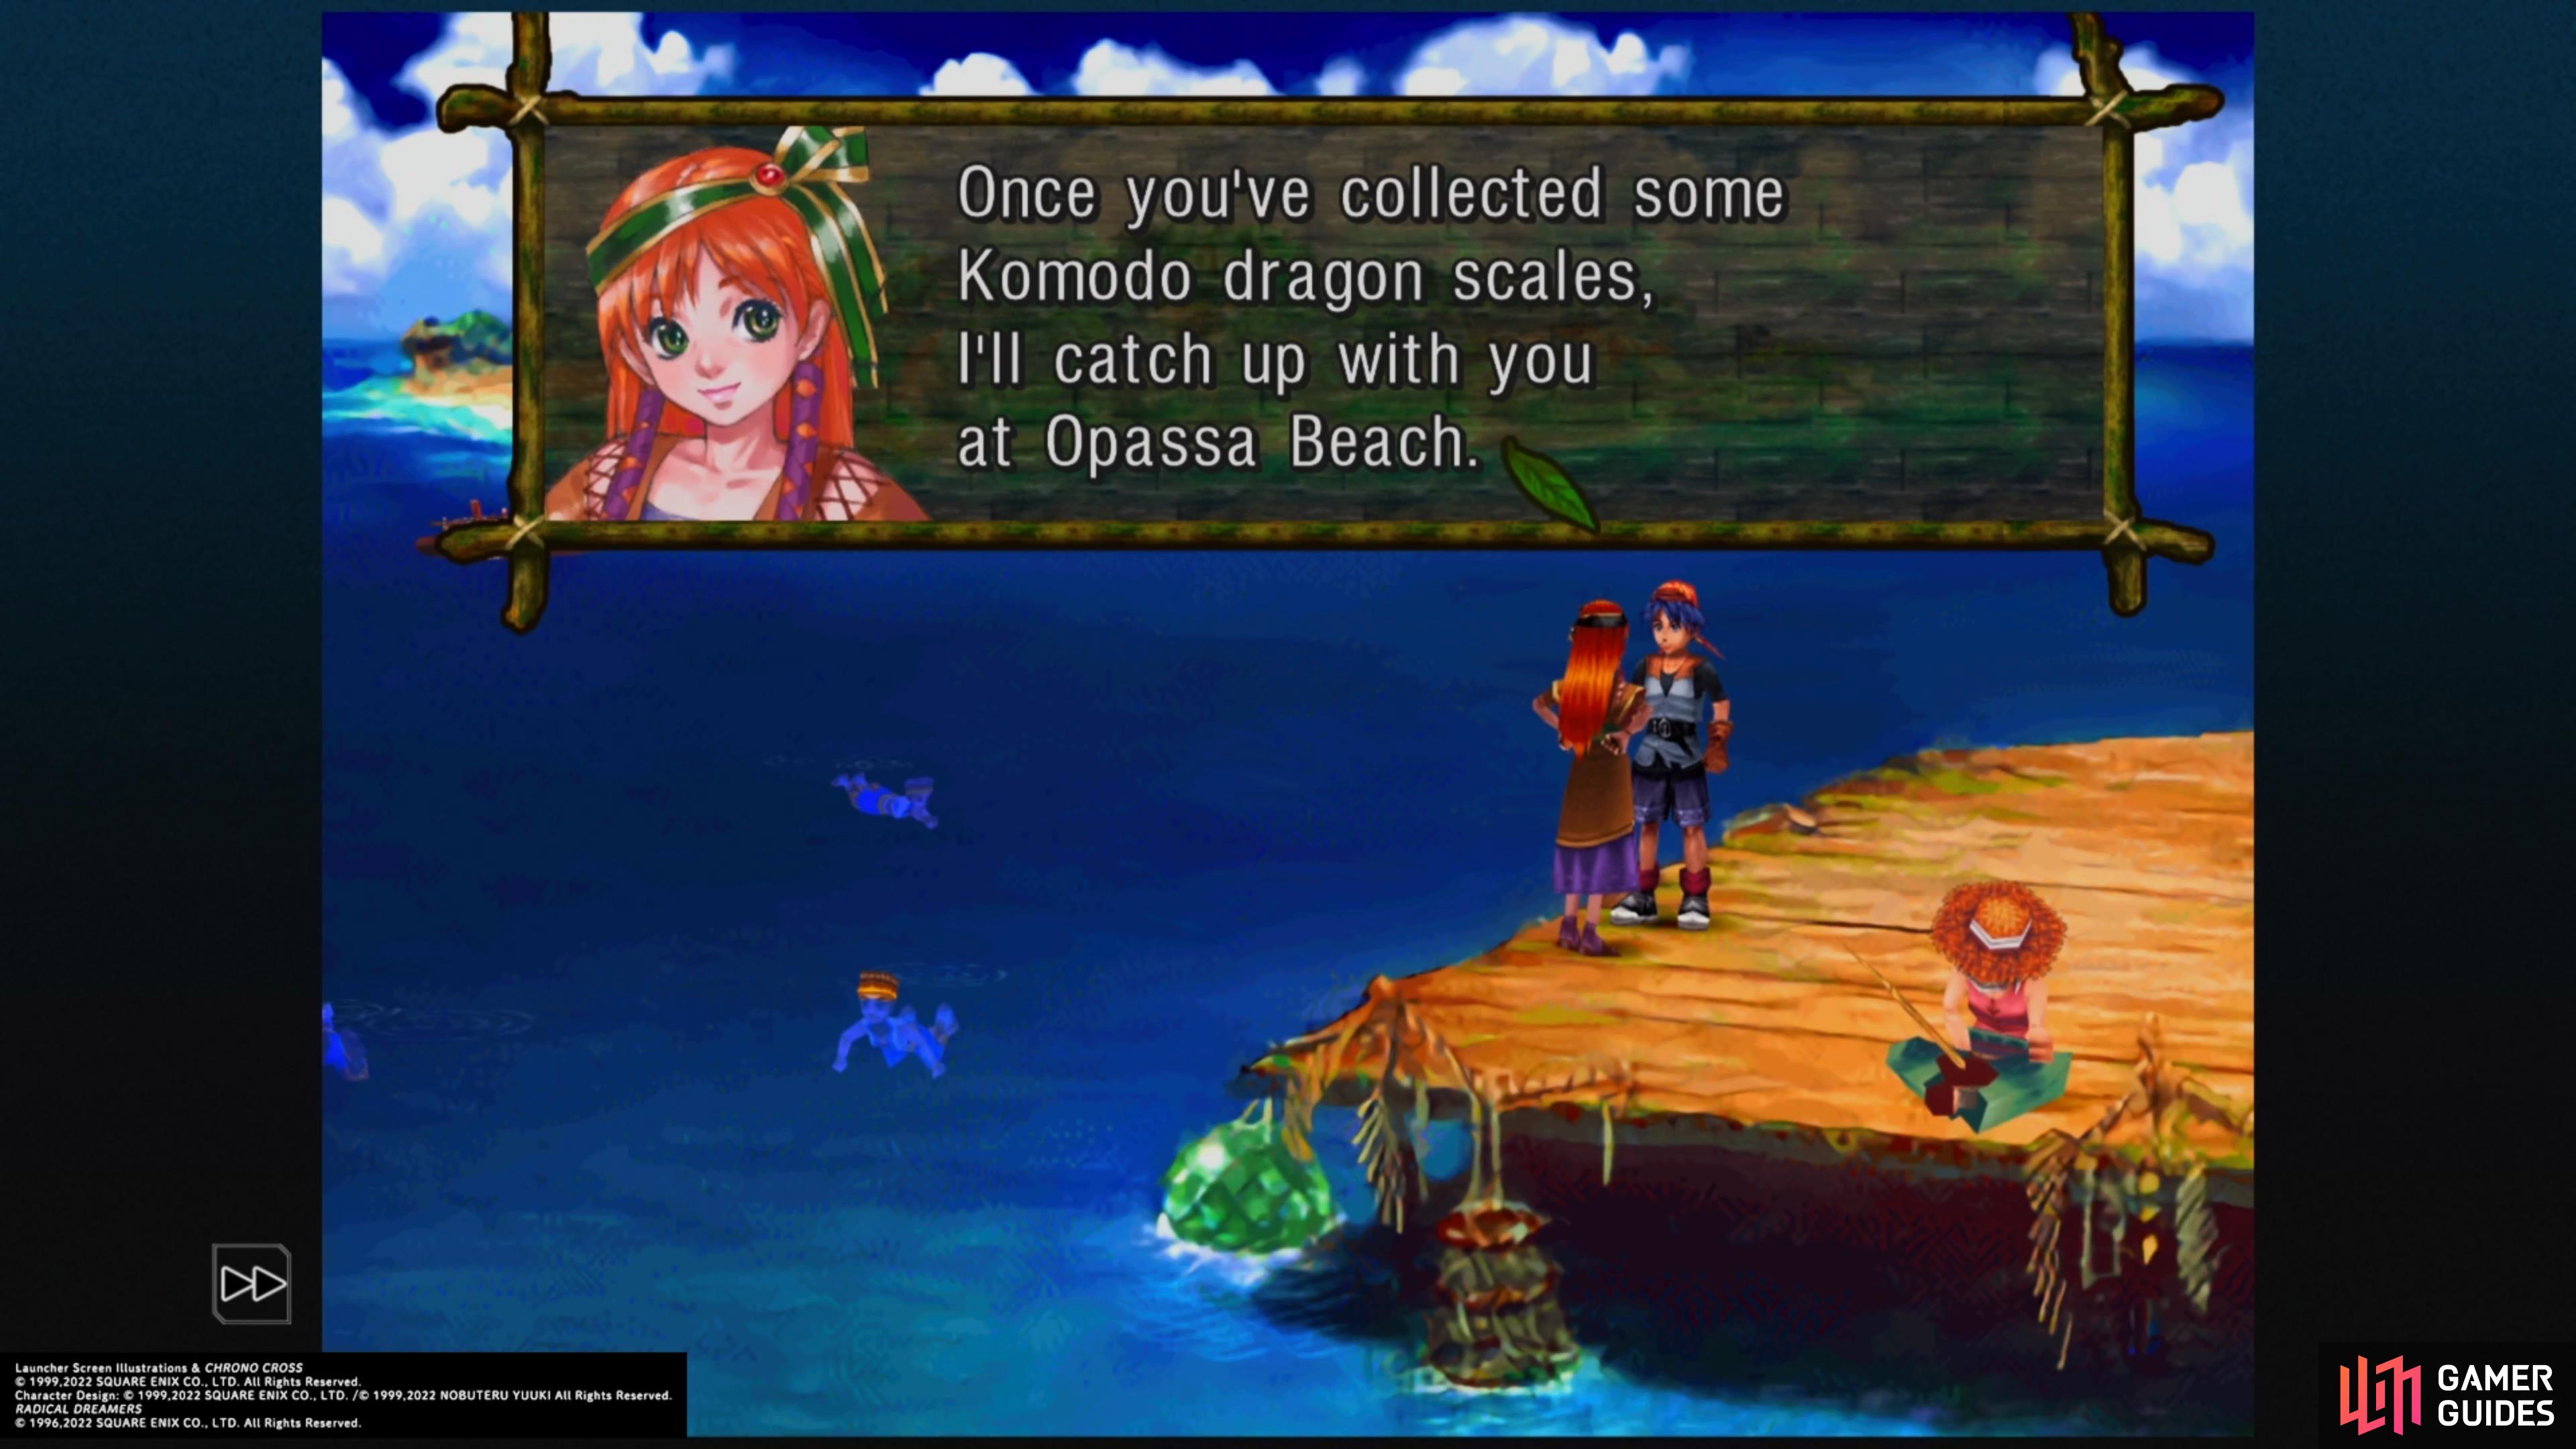 She promises to meet you at Opassa Beach when you have the Komodo Scales